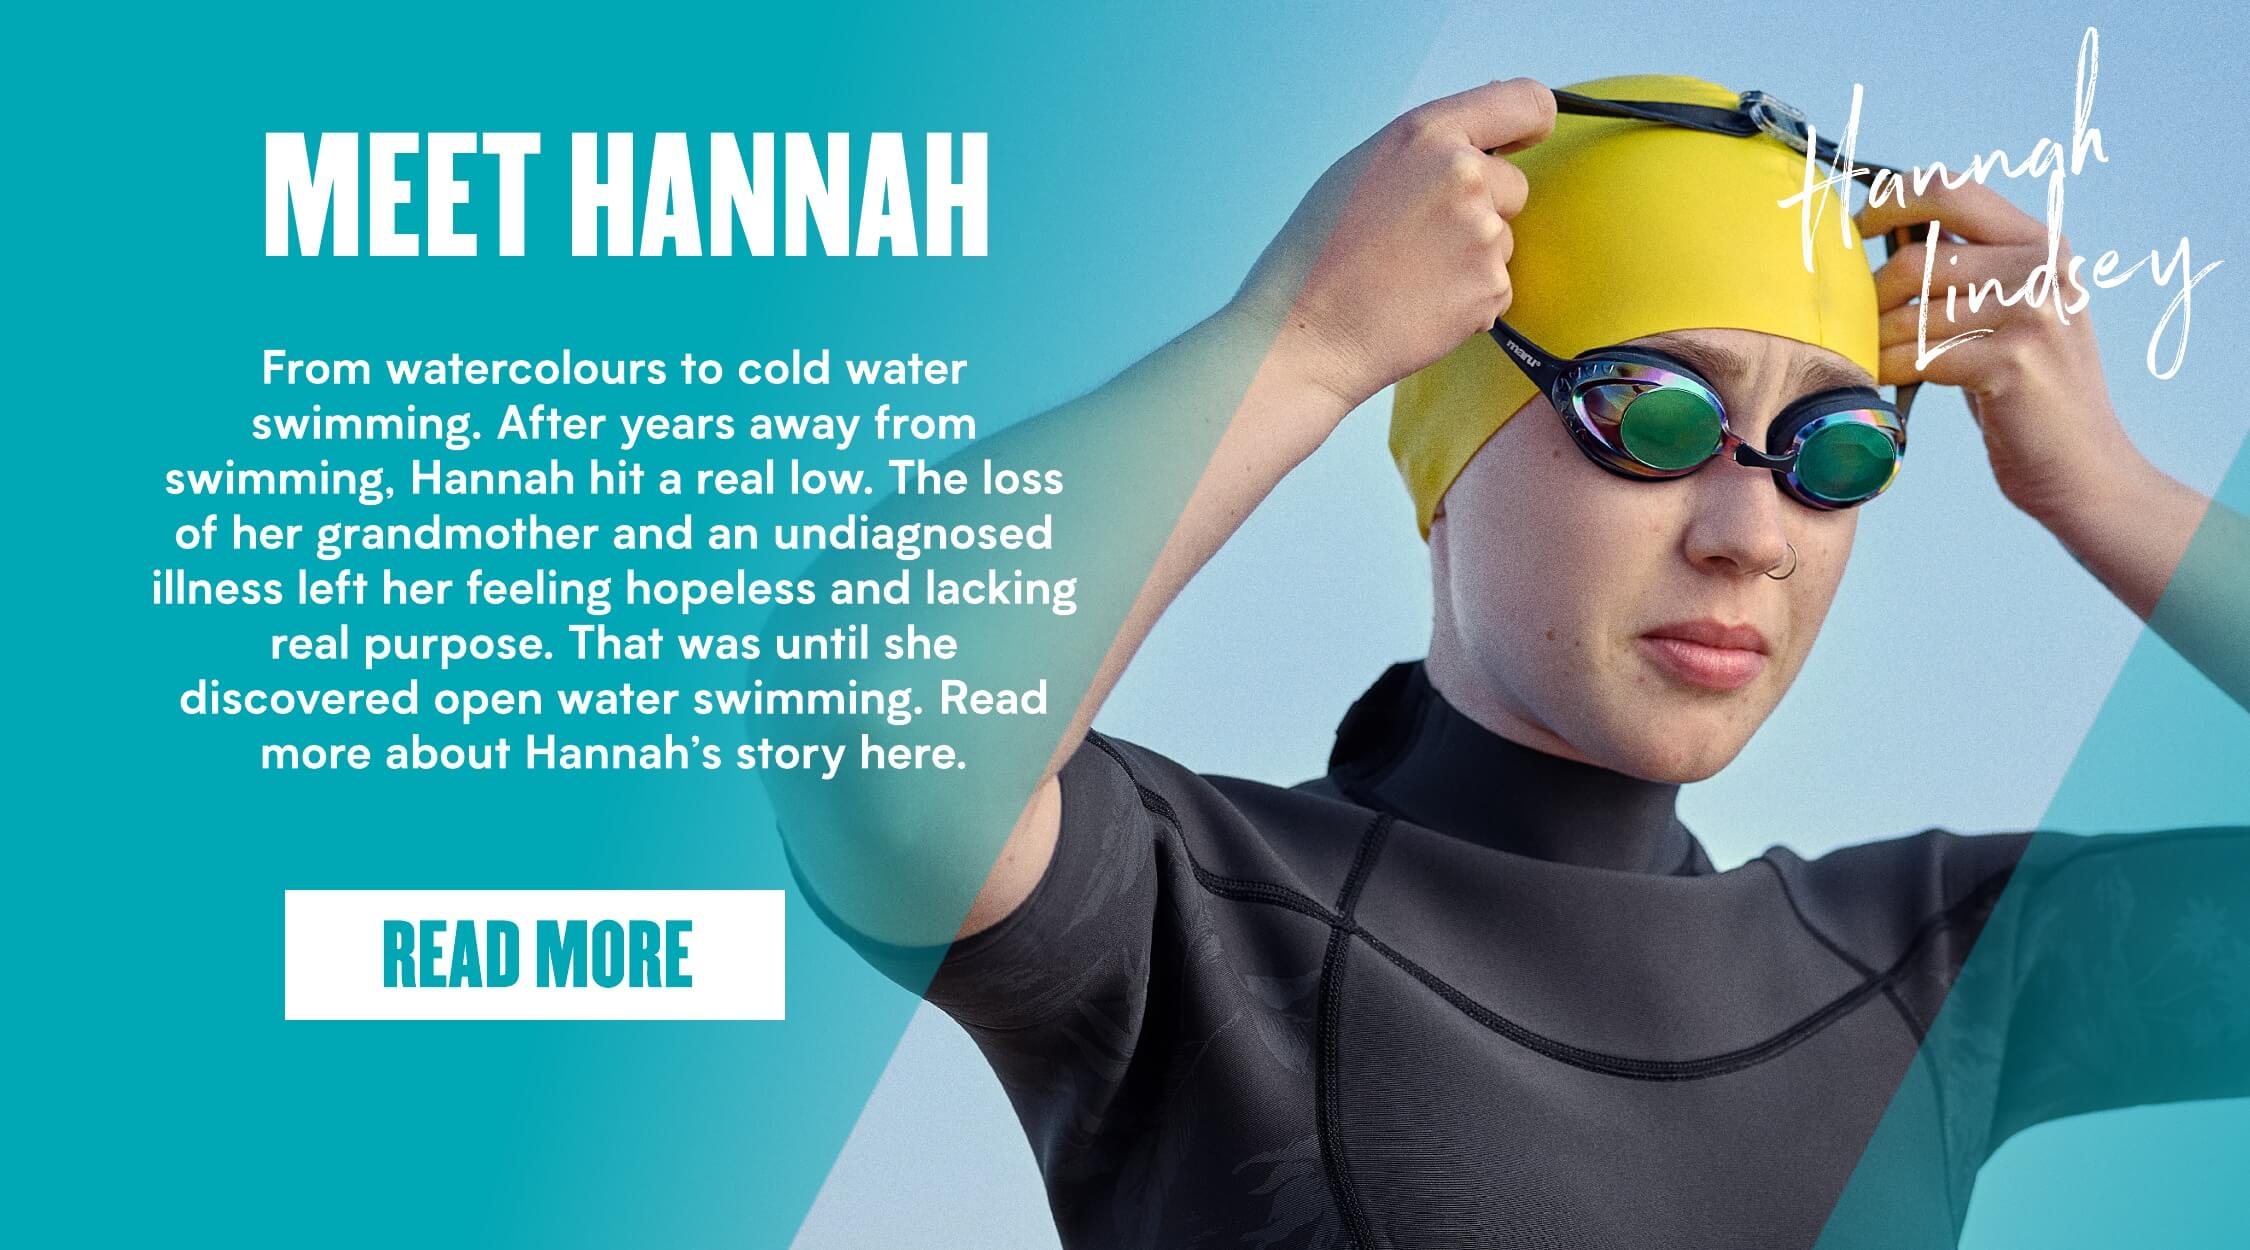 https://www.myprotein.ie/blog/our-ambassadors/hannah-open-water-swimming-050721/